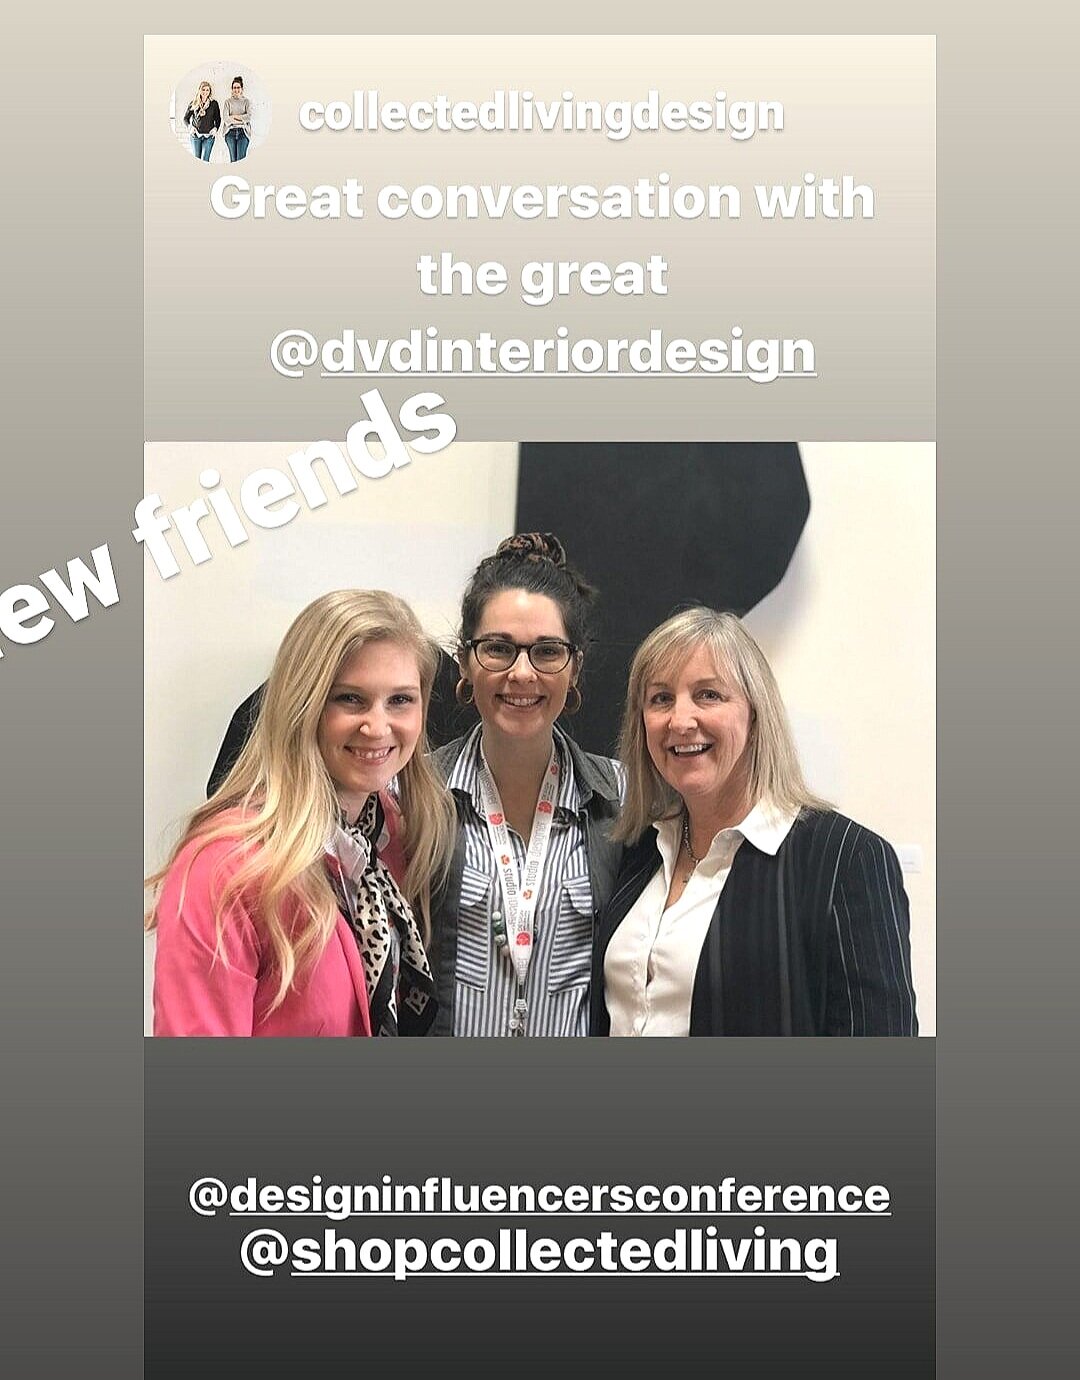 design influencers conference mentoring sessions